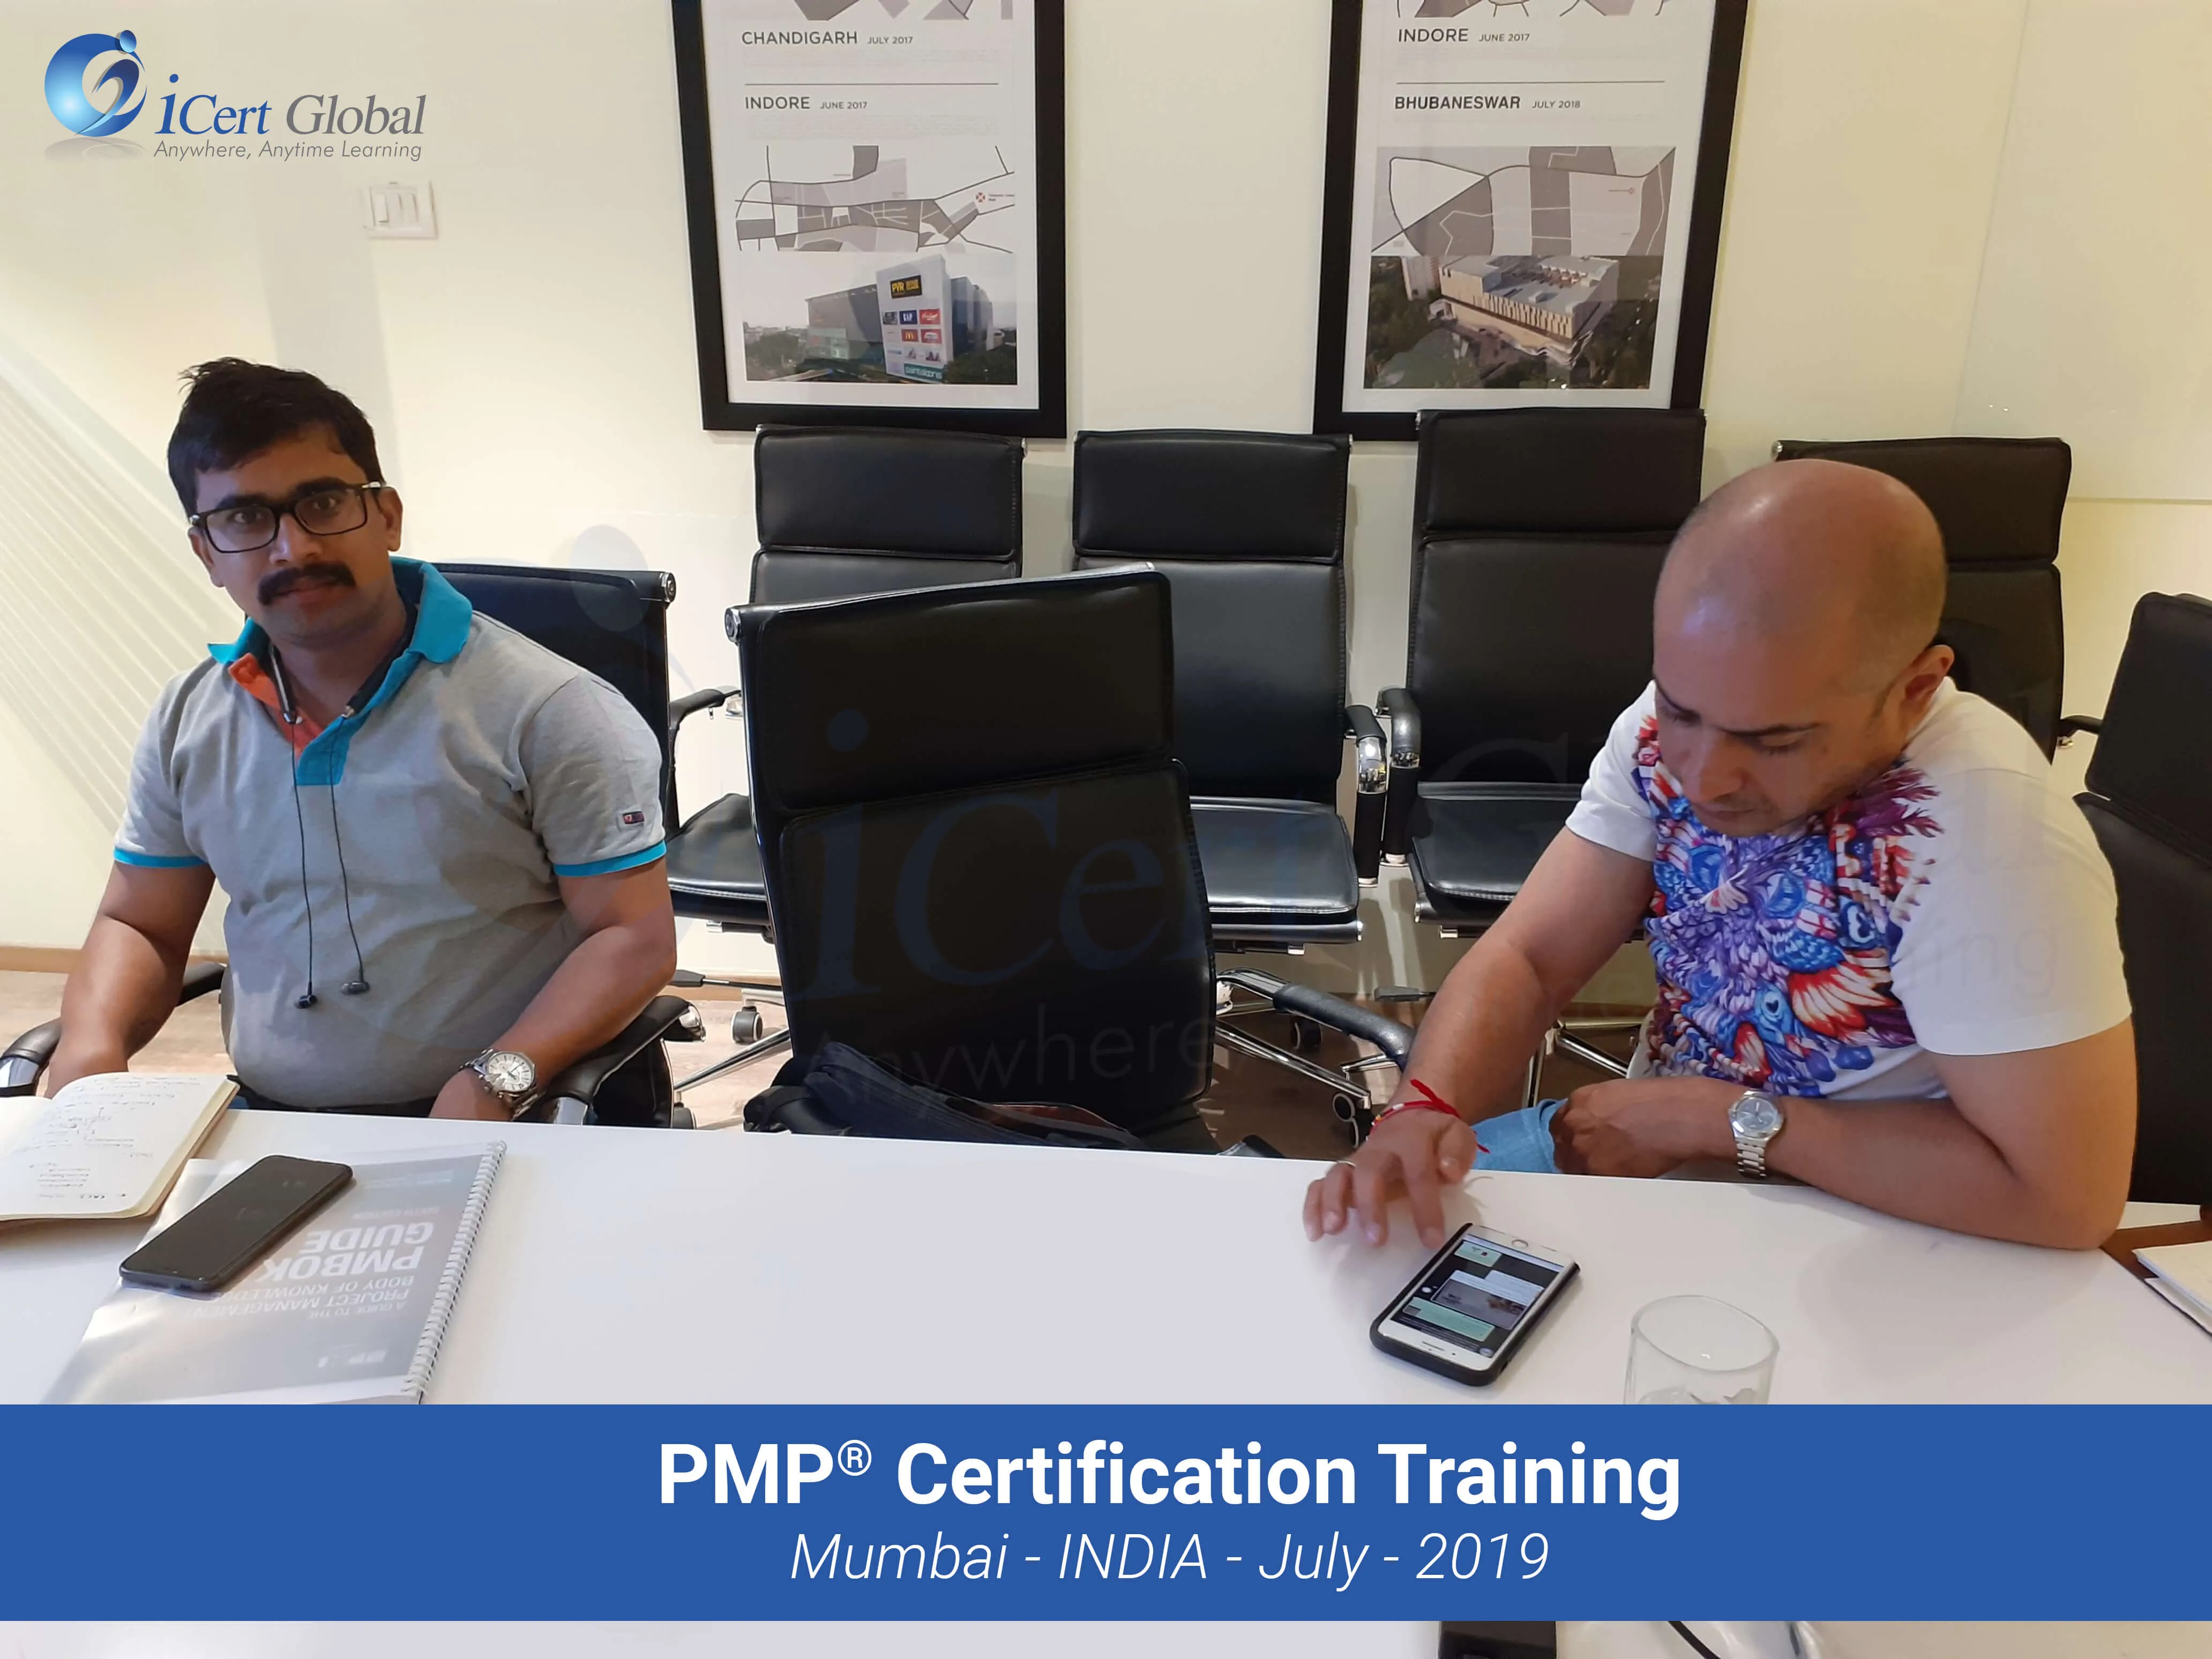 PMP Project Management Certification Training Course conducted by iCert Global in Mumbai, India in July 2019 